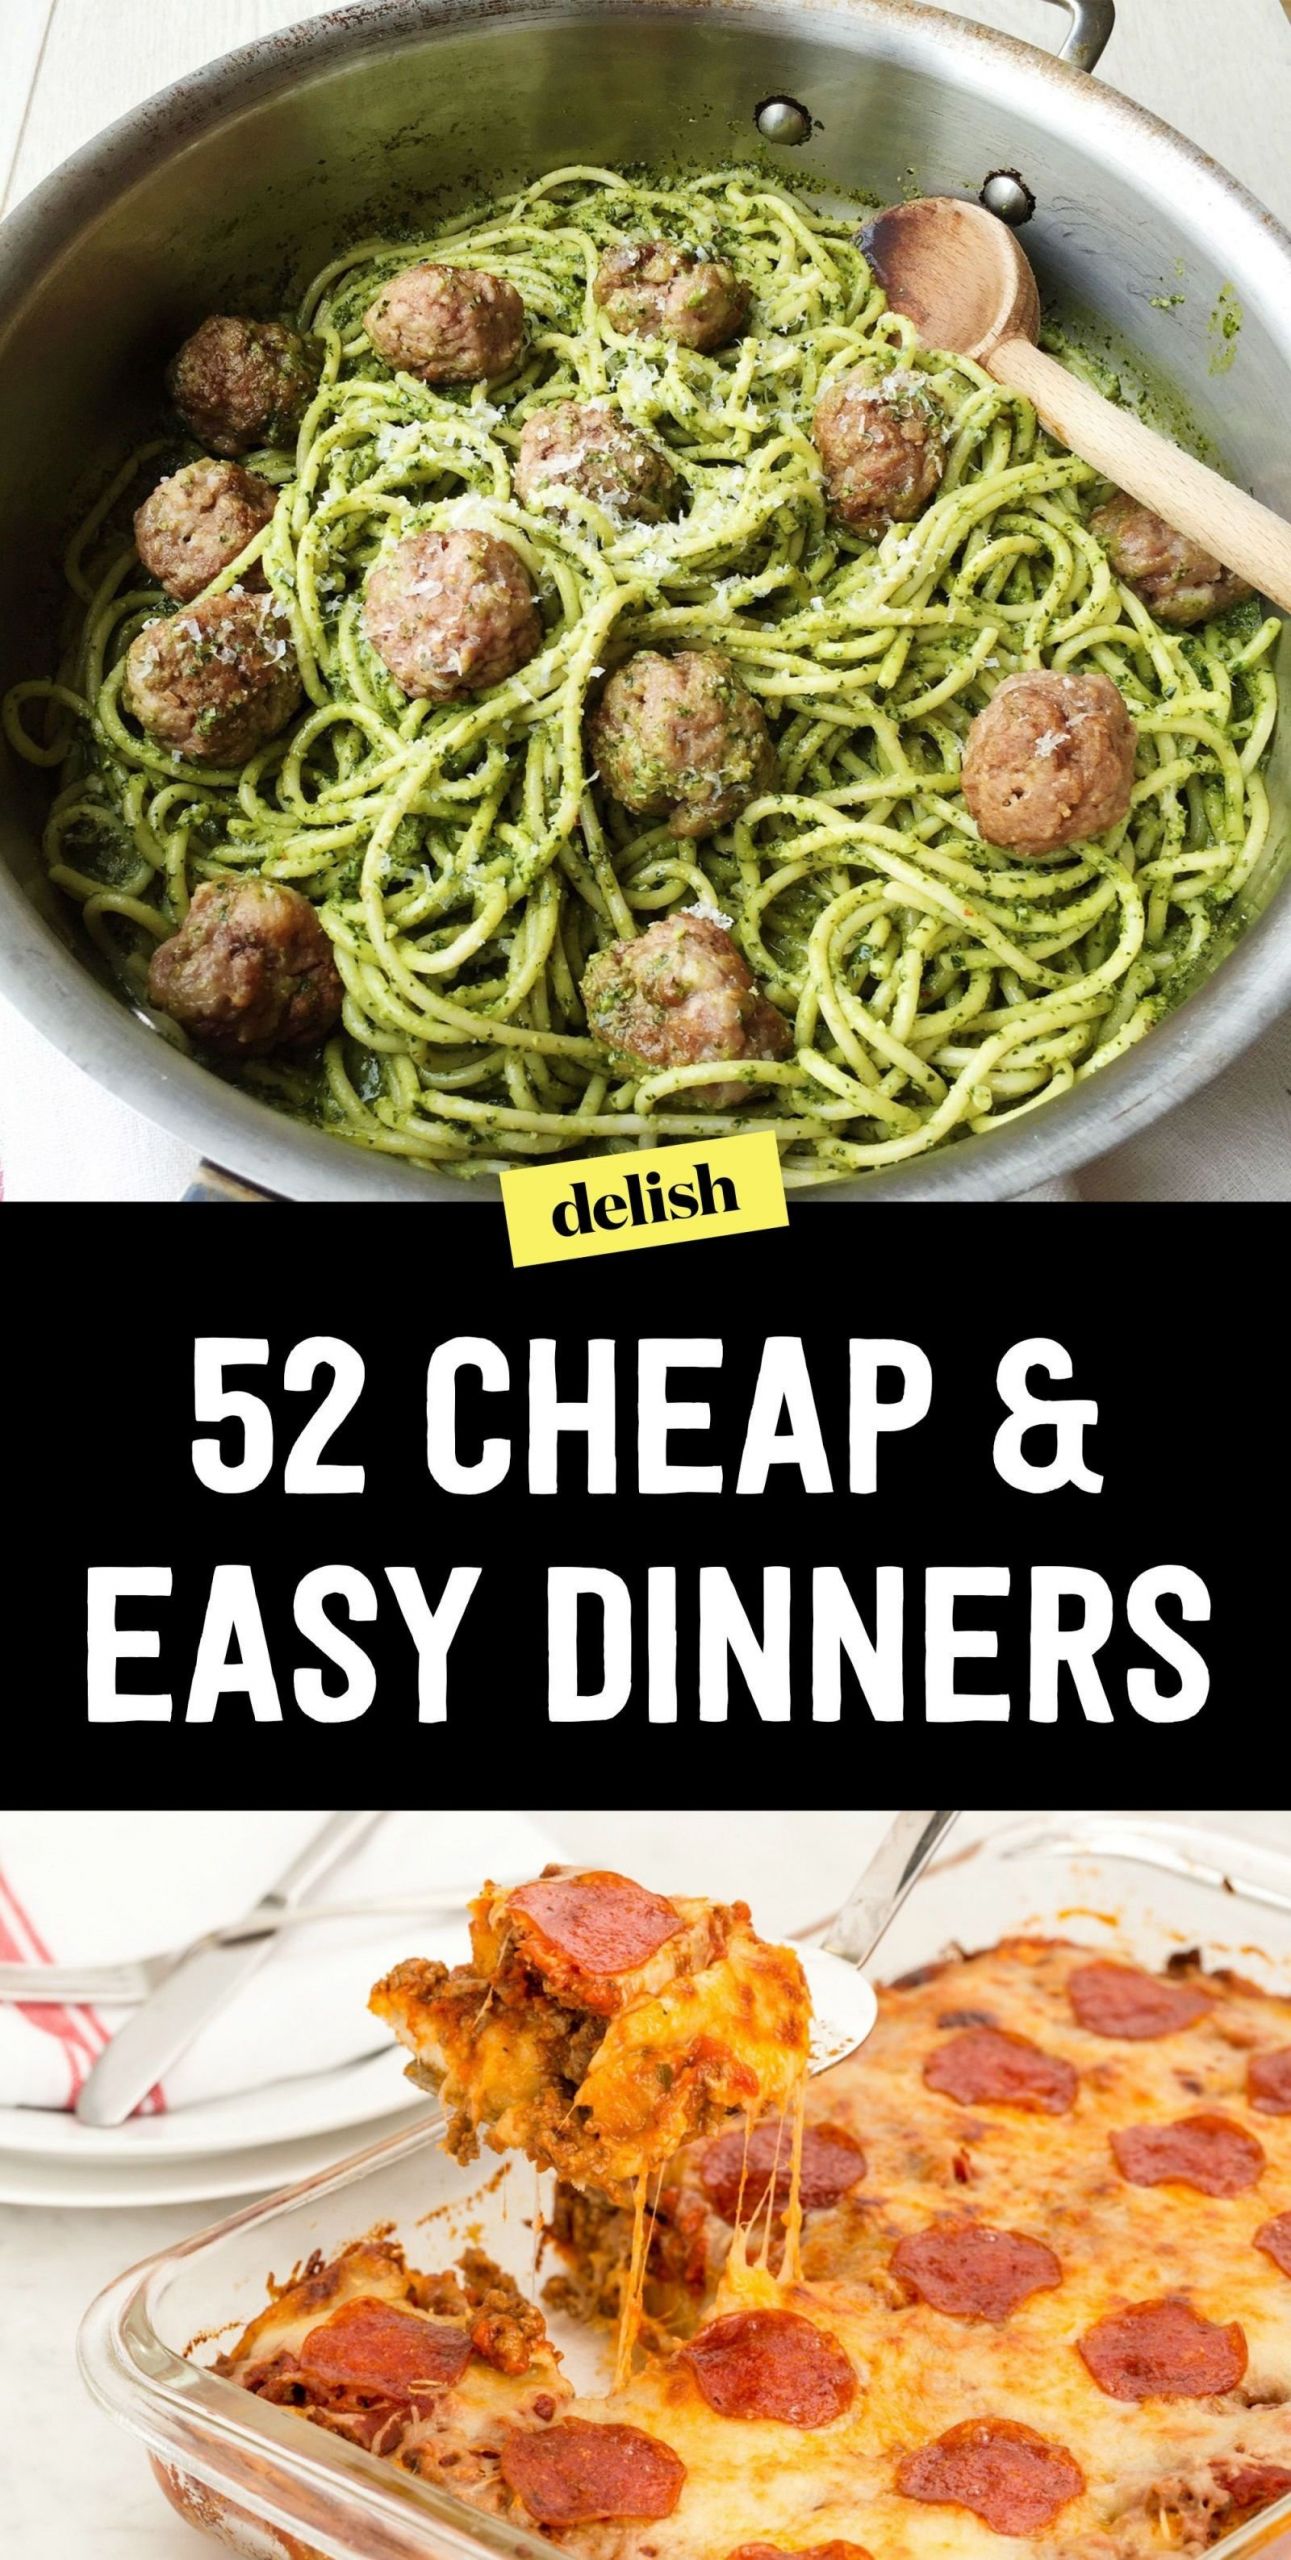 Cheap And Easy Dinner Ideas
 10 Great Cheap Meal Ideas For 2 2019